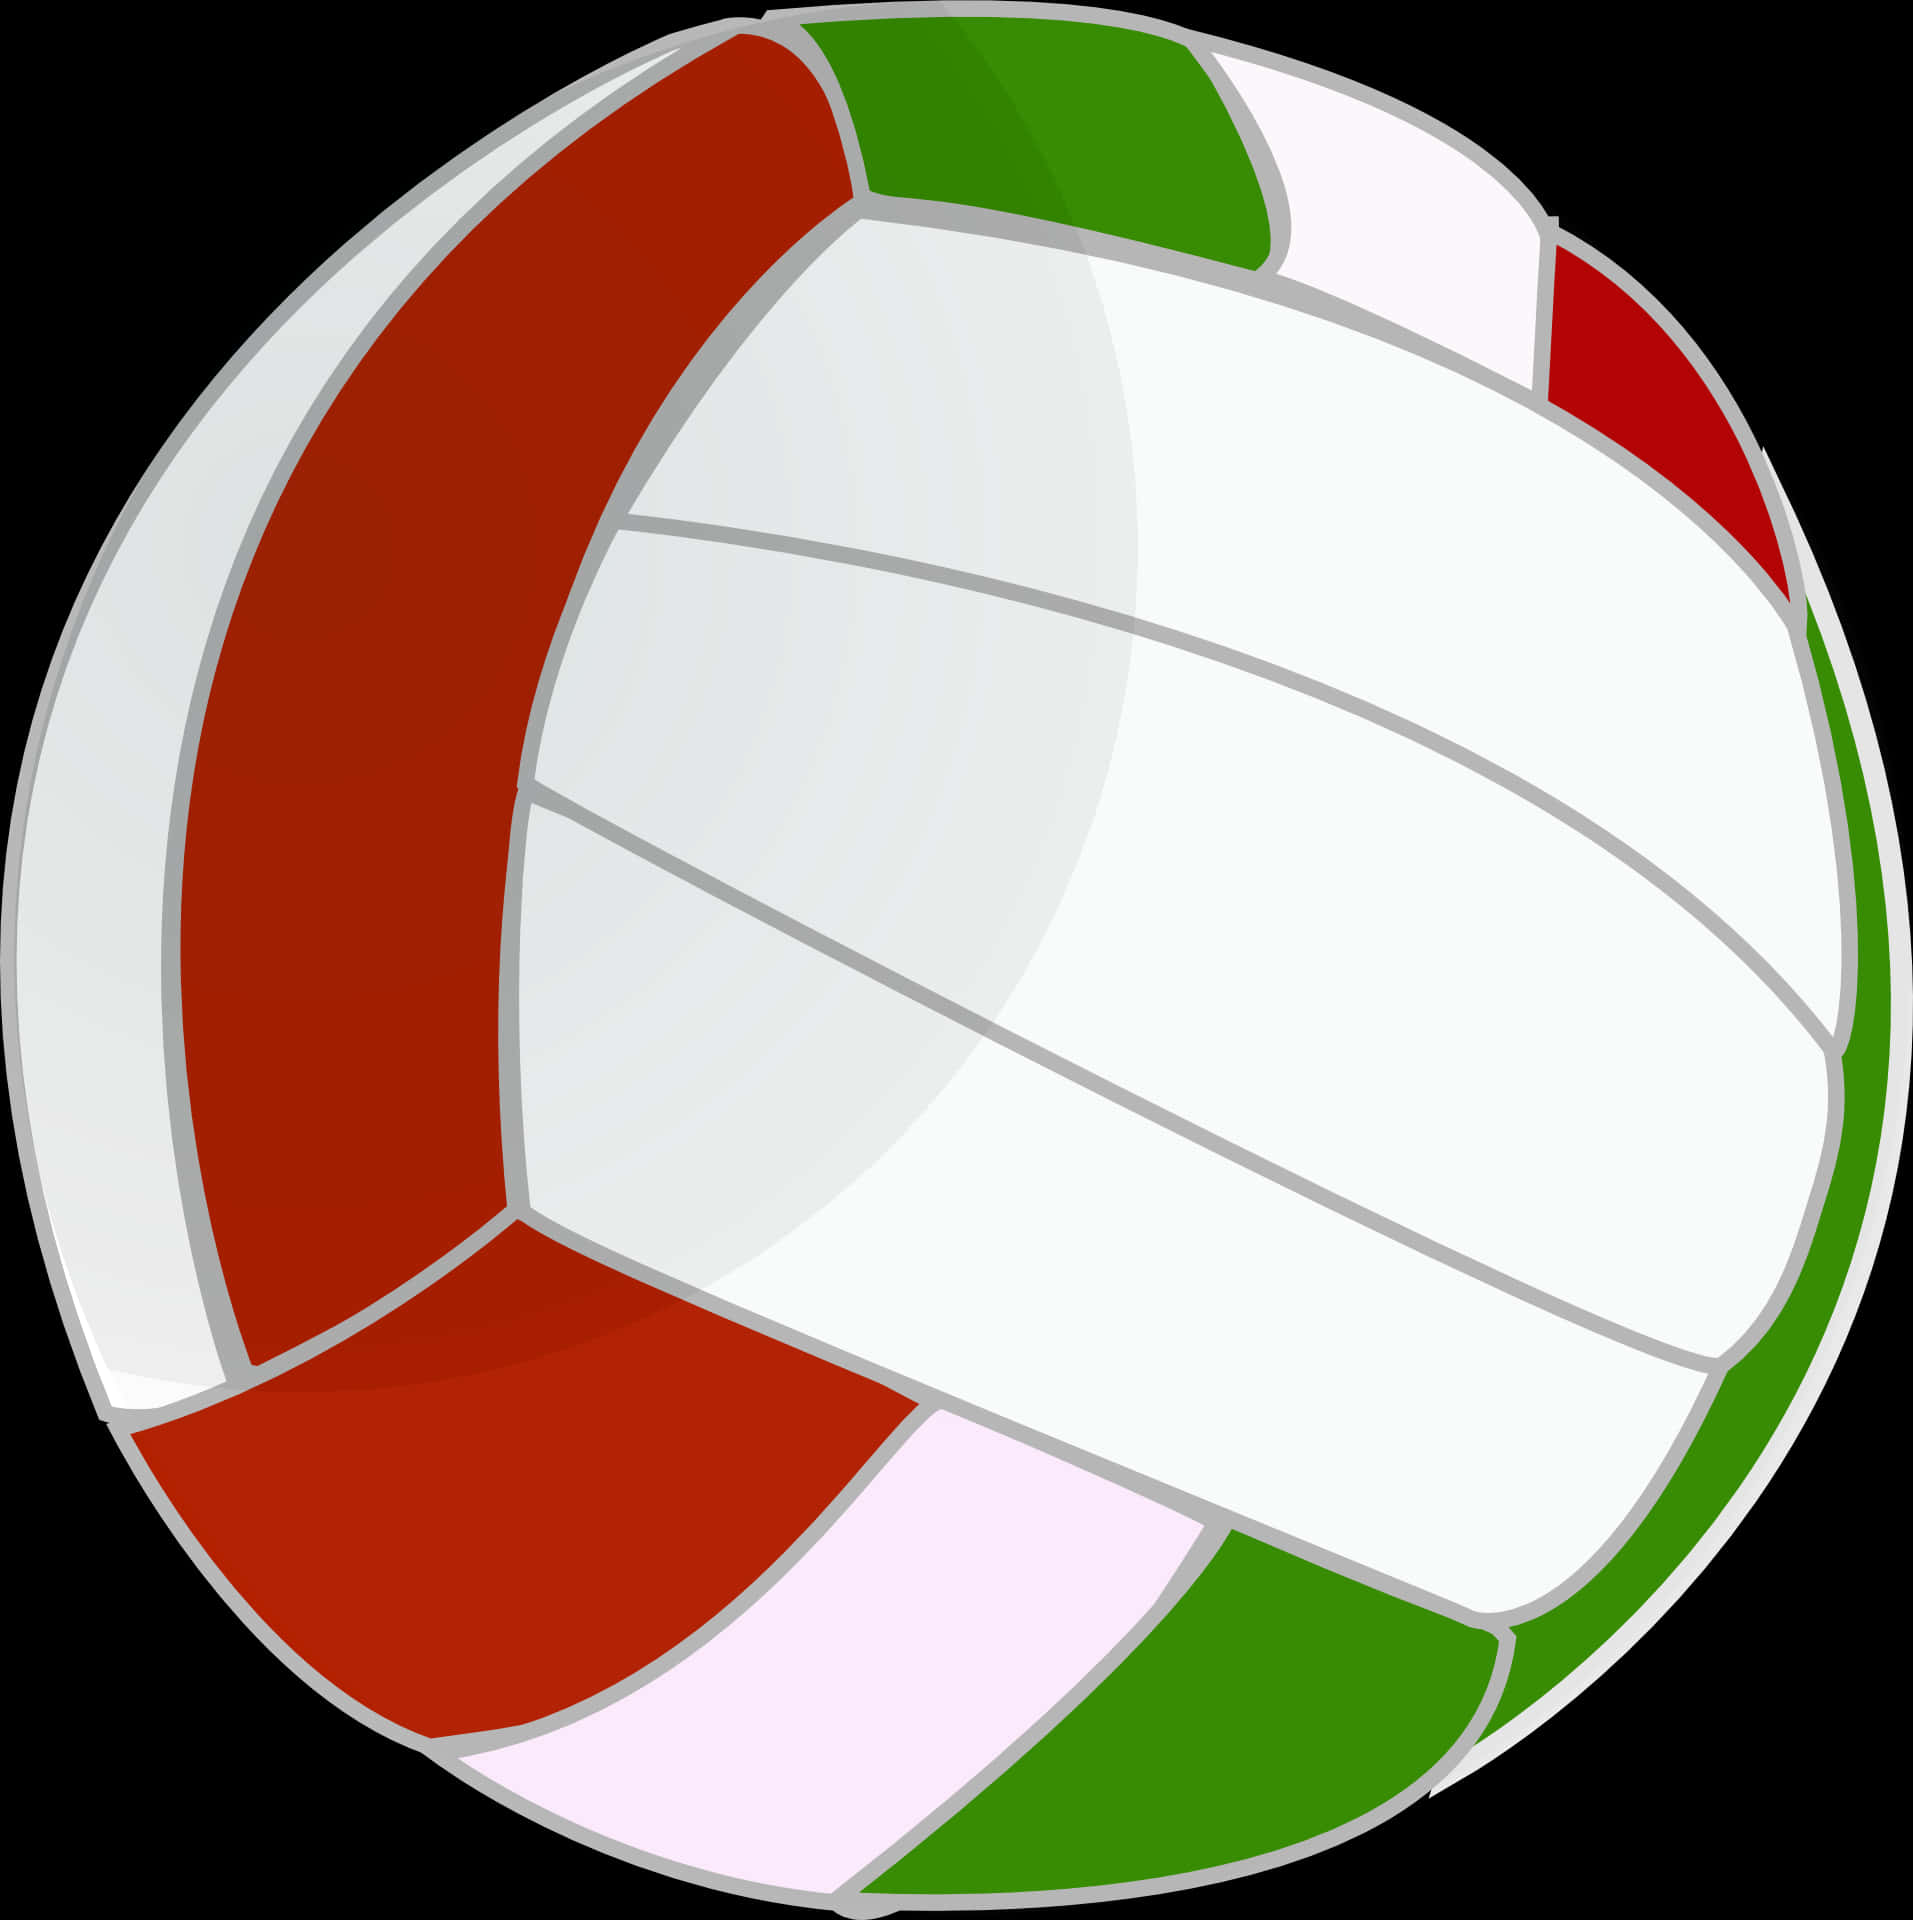 Red, Green, And White Volleyball